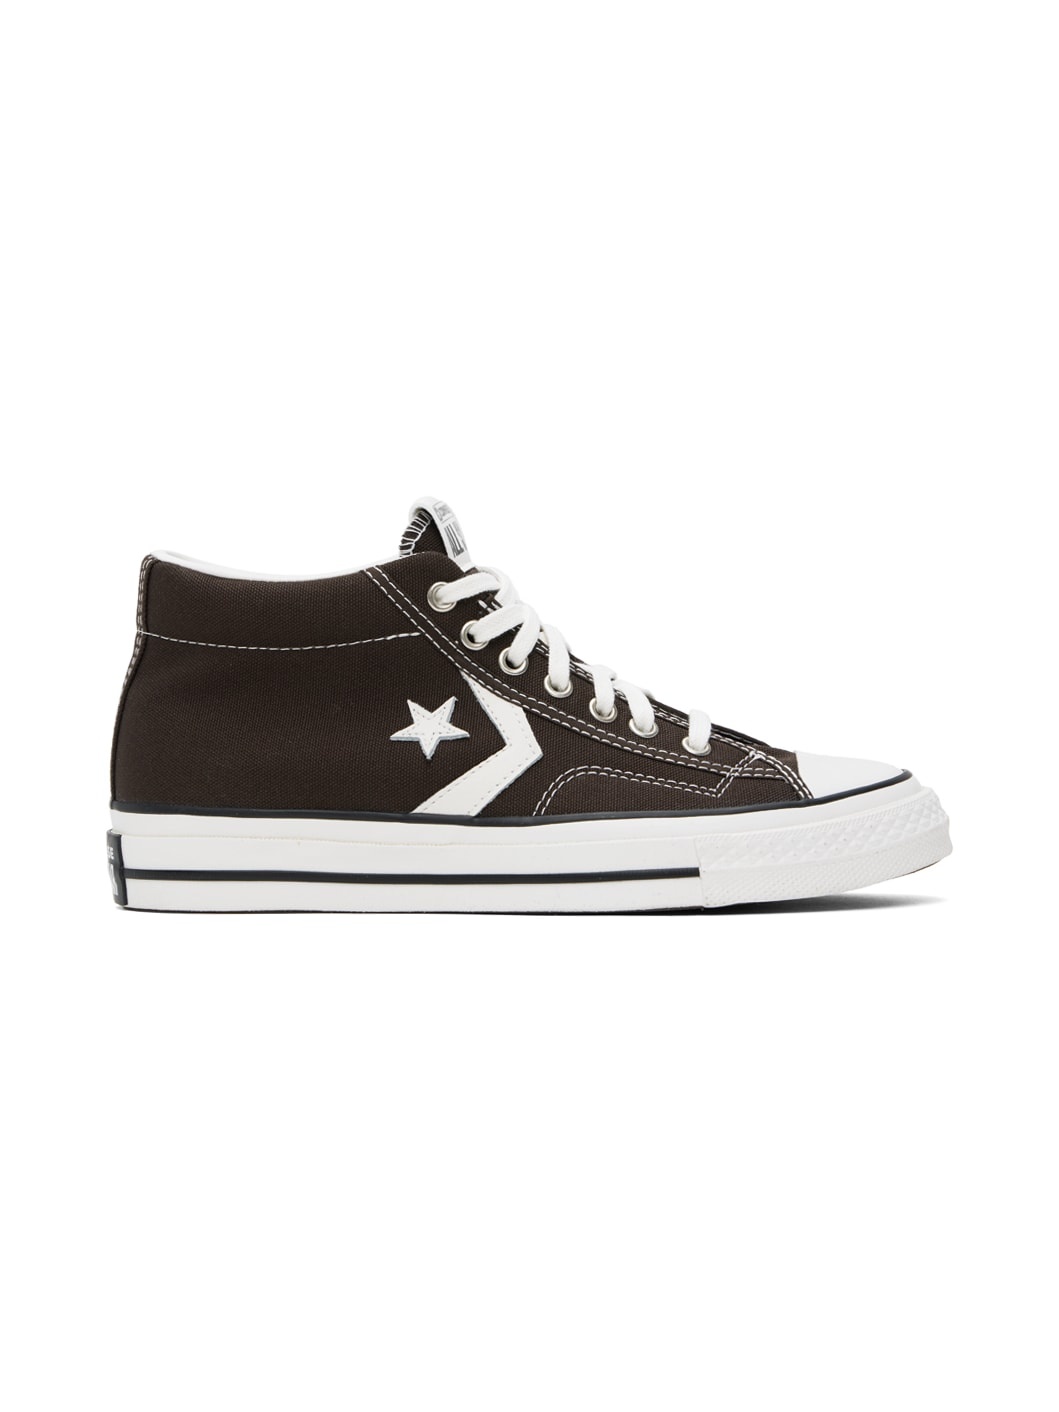 Brown Star Player 76 Mid Top Sneakers - 1